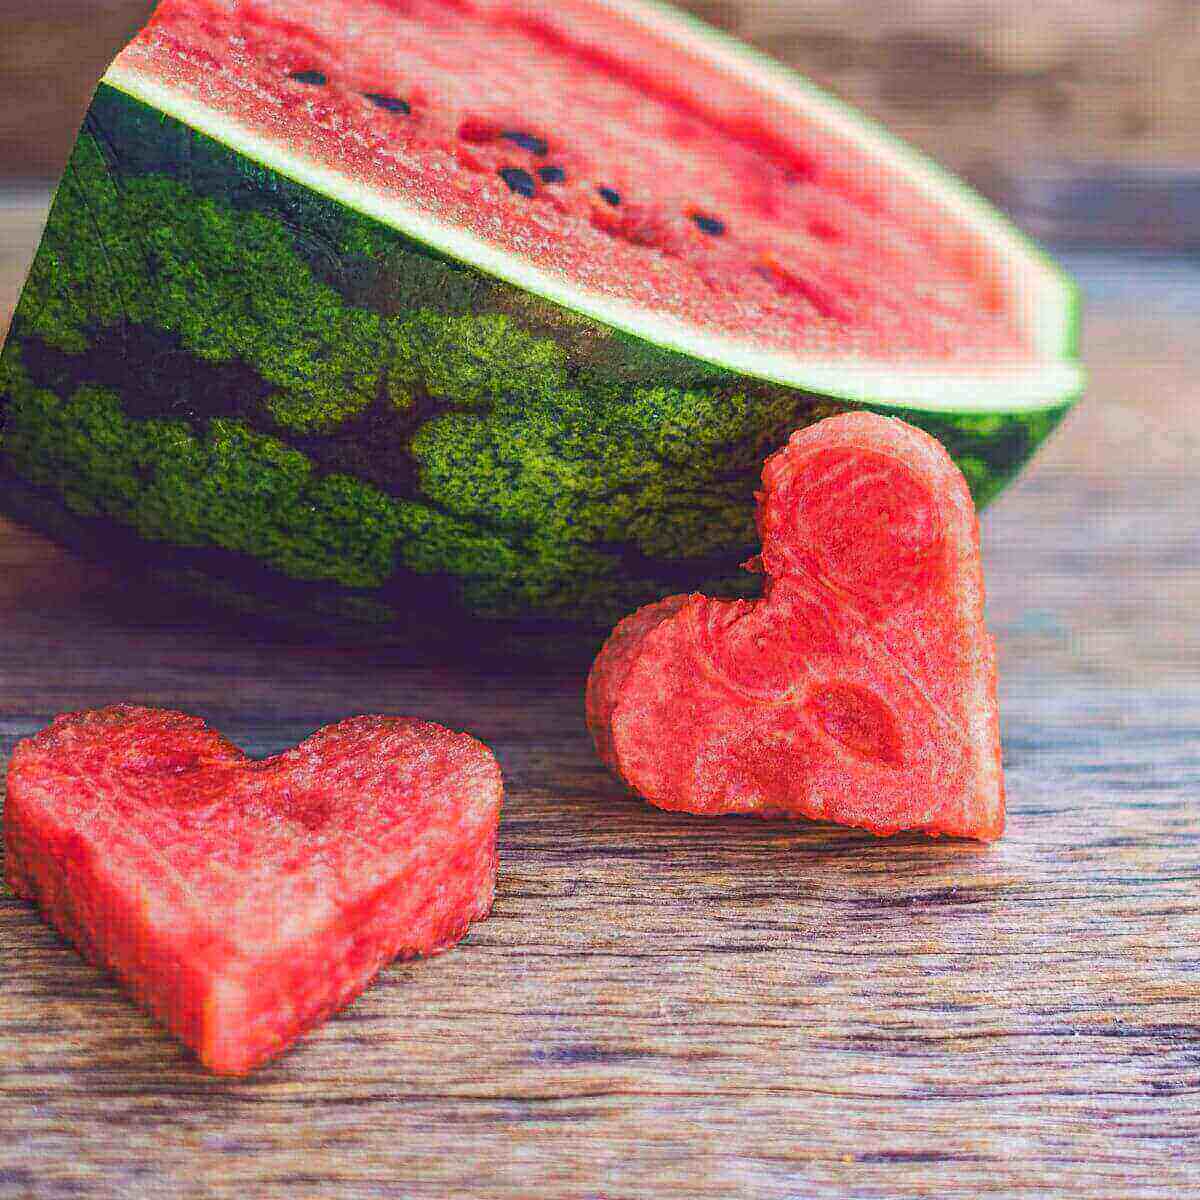 On a wood grained table sits one quarter of a watermelon. In front is two hearts cut from the watermelon.